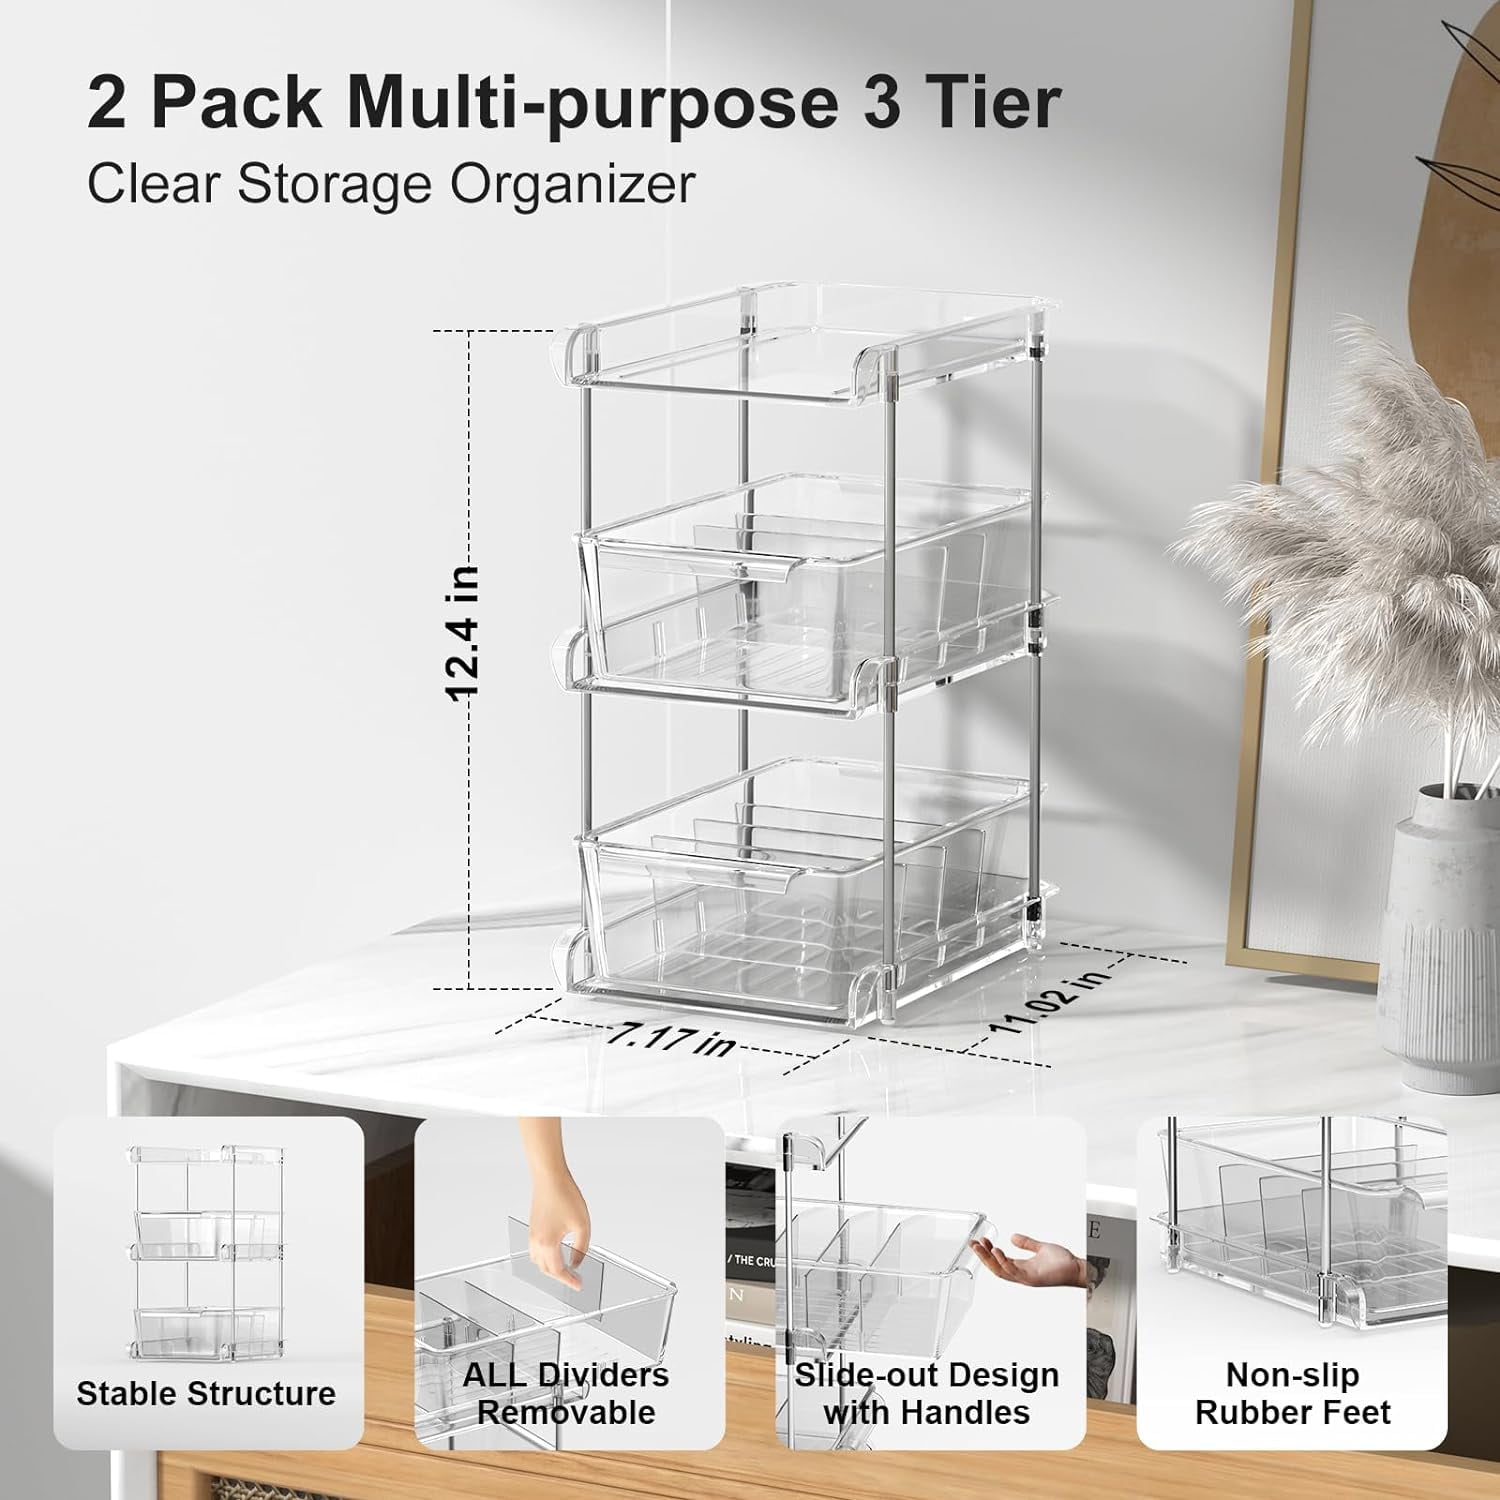  Fowooyeen 2 Pack Bathroom Cabinet Organizer, 2 Tier Pull Out  Clear Under Sink Organizers and Storage, Multi-Purpose Kitchen Pantry  Medicine Organization and Storage Shelves Bins with Movable Dividers